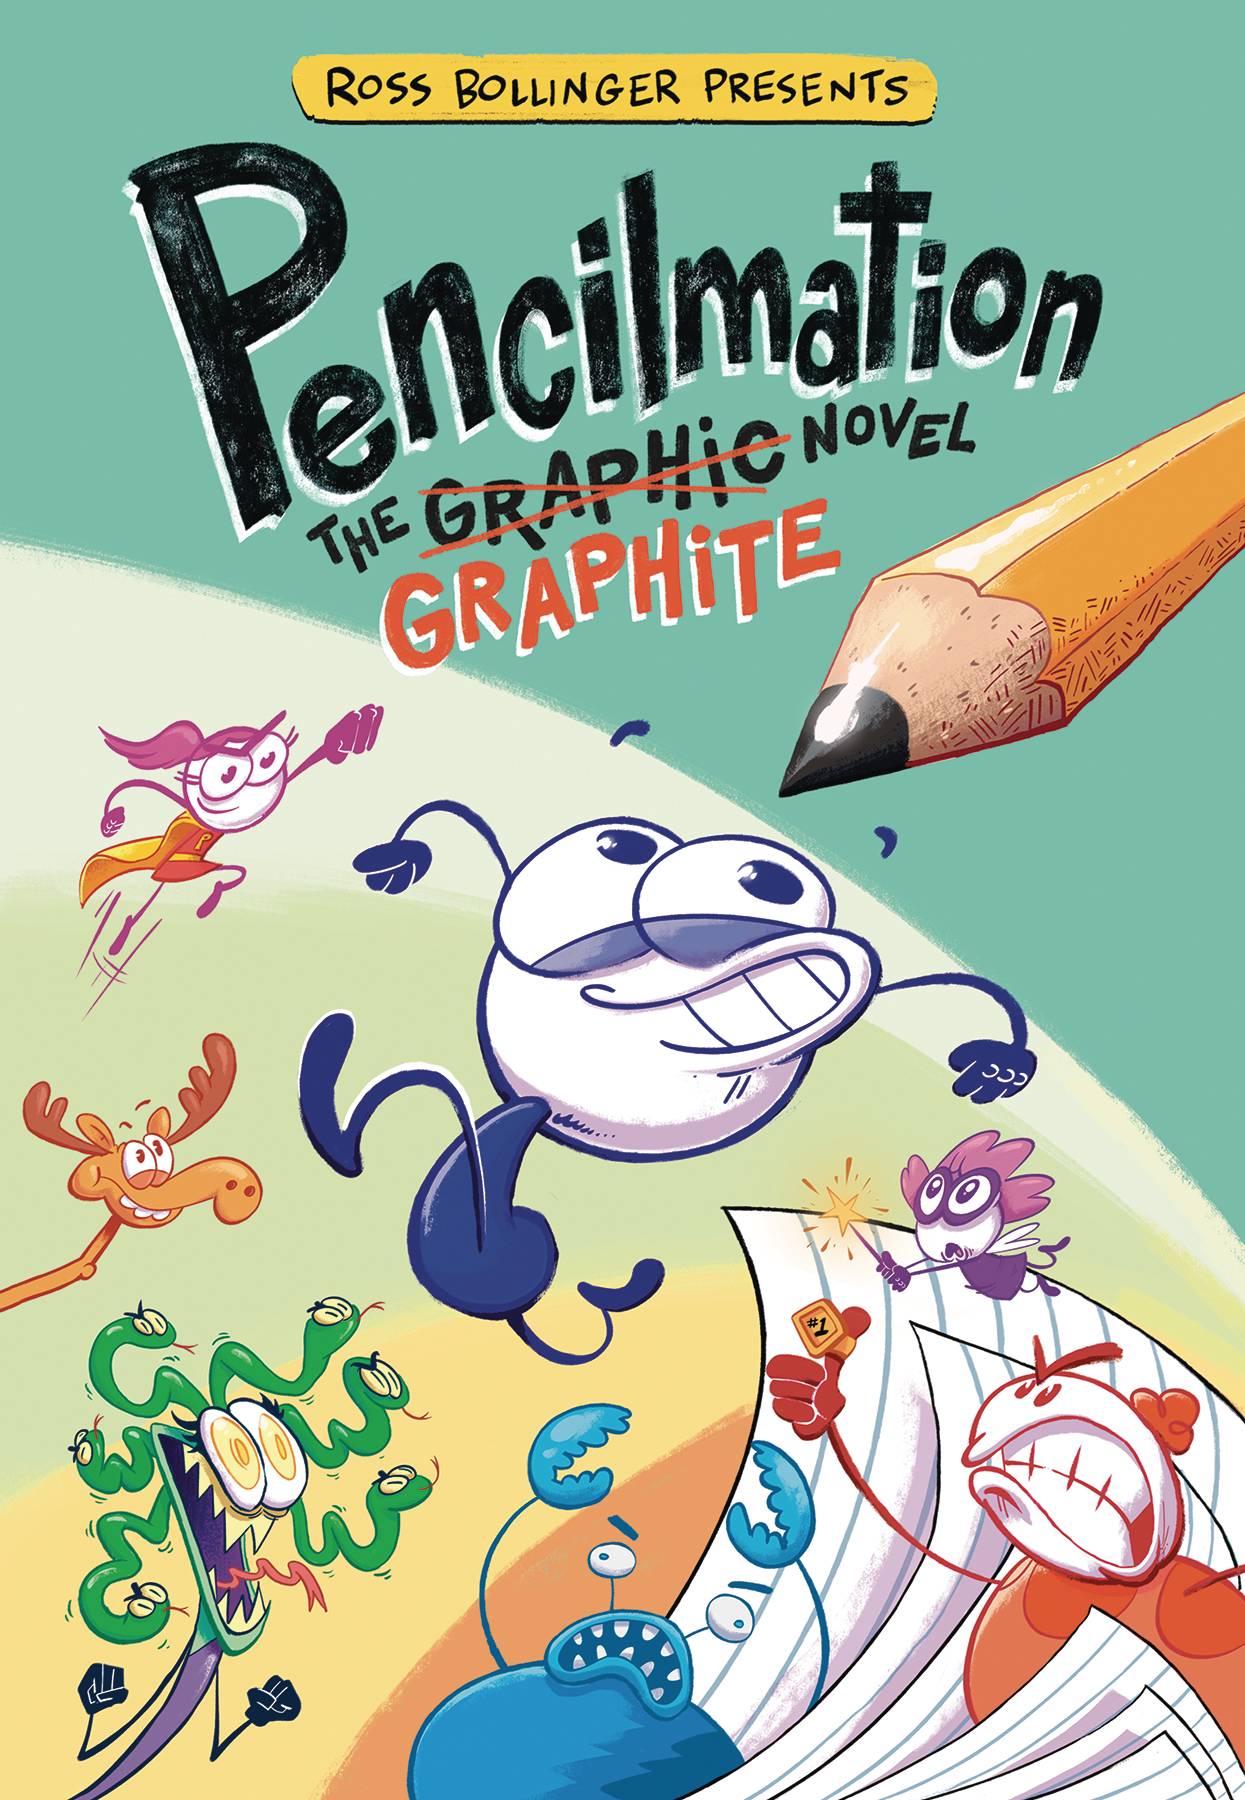 The One Stop Shop Comics & Games Pencilmation Graphite Novel (C: 0-1-0) (12/28/2022) PENGUIN YOUNG READERS